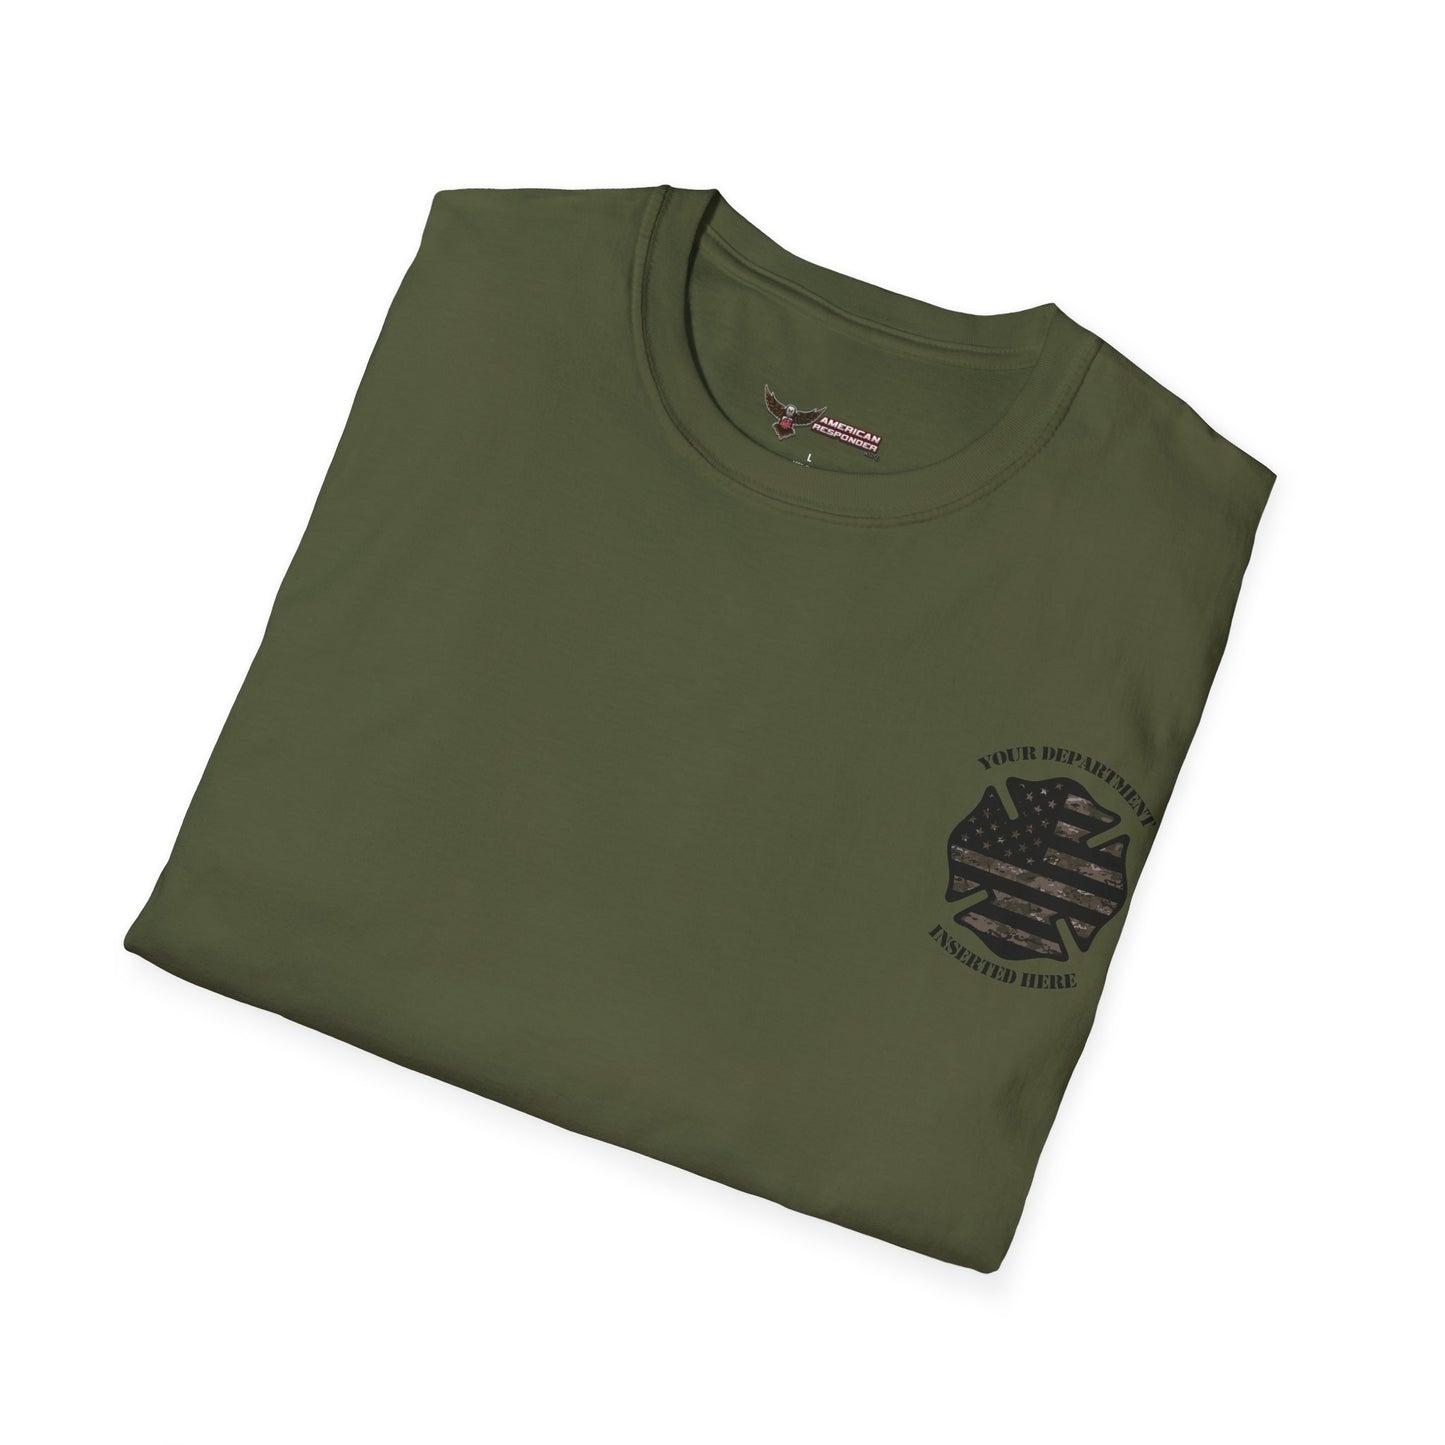 Personalized FD Military Support Shirt - American Responder Designs